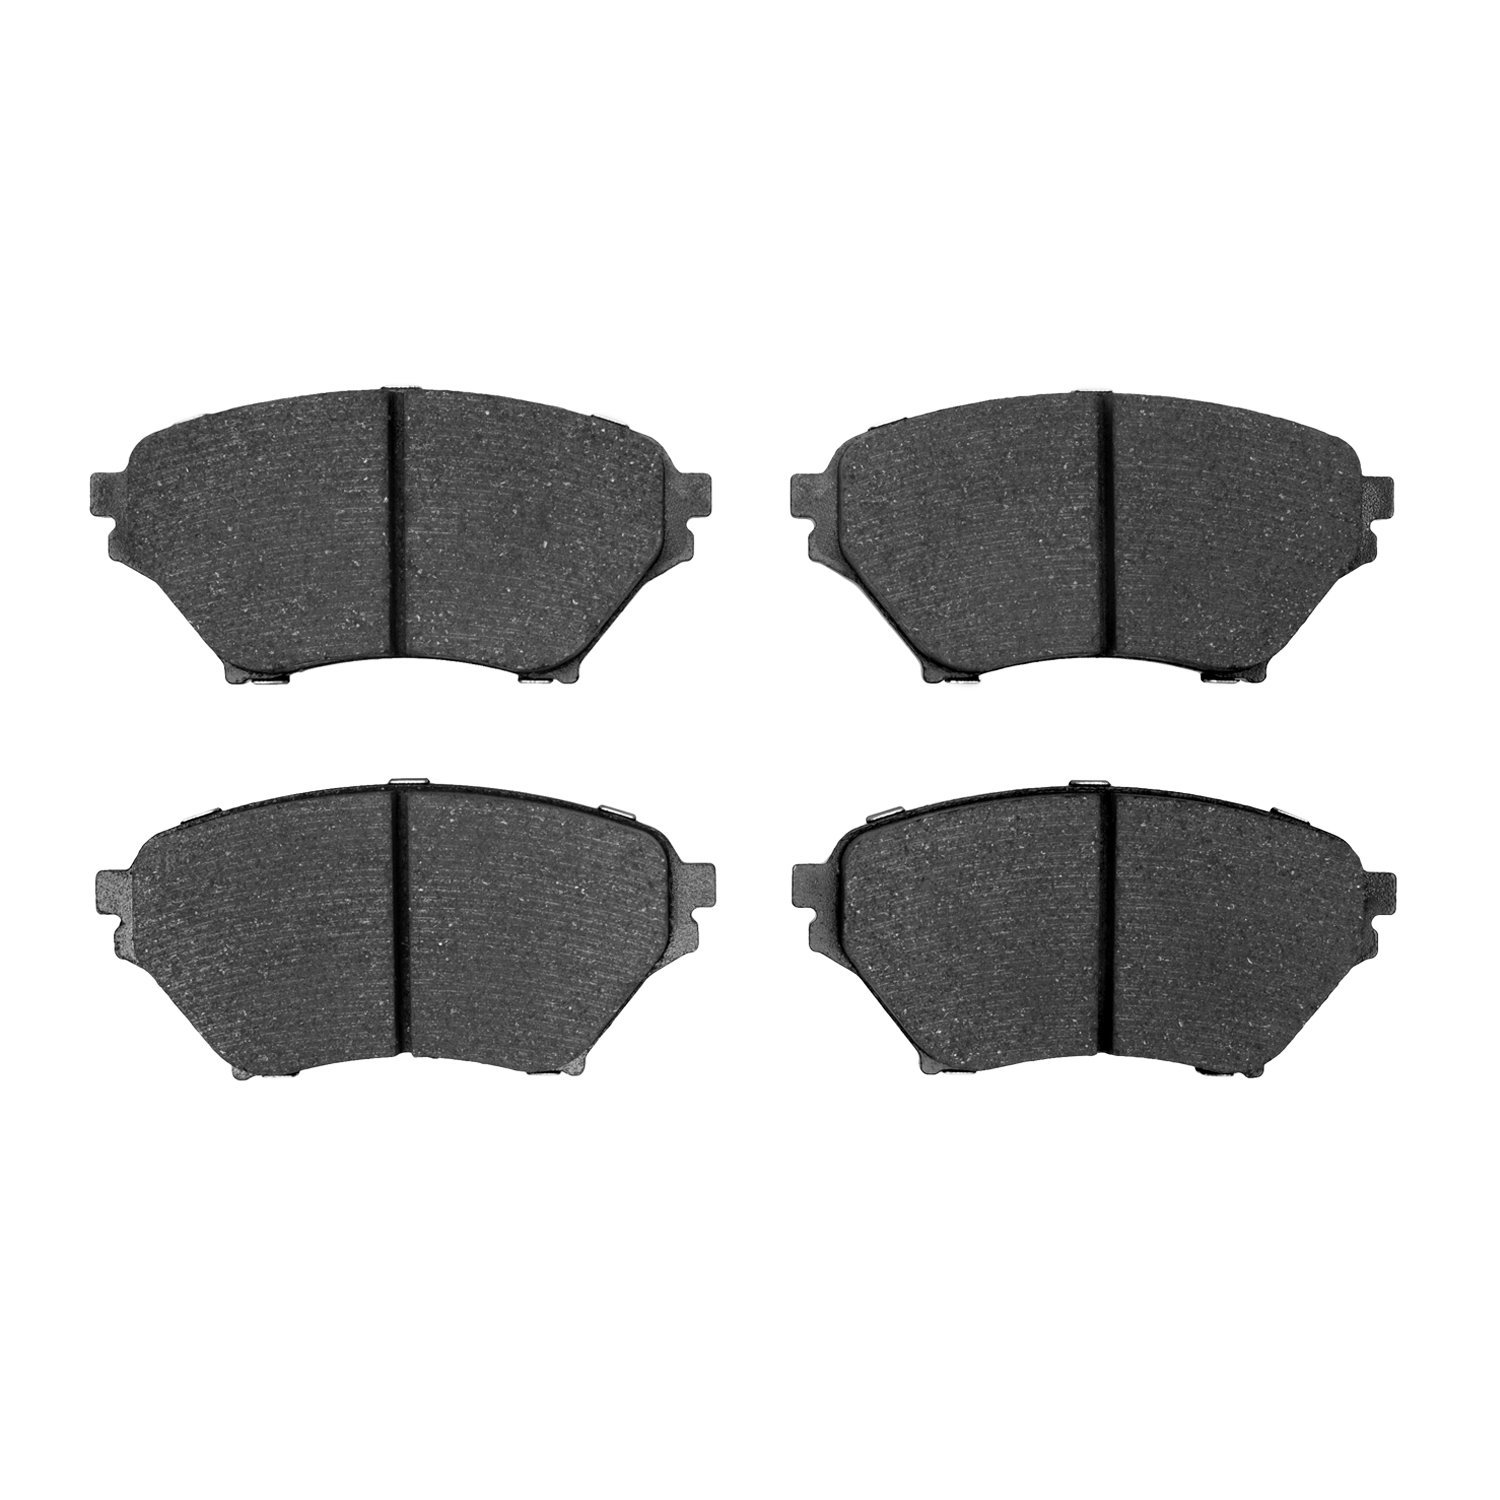 1000-0890-00 Track/Street Low-Metallic Brake Pads Kit, 2001-2005 Ford/Lincoln/Mercury/Mazda, Position: Front